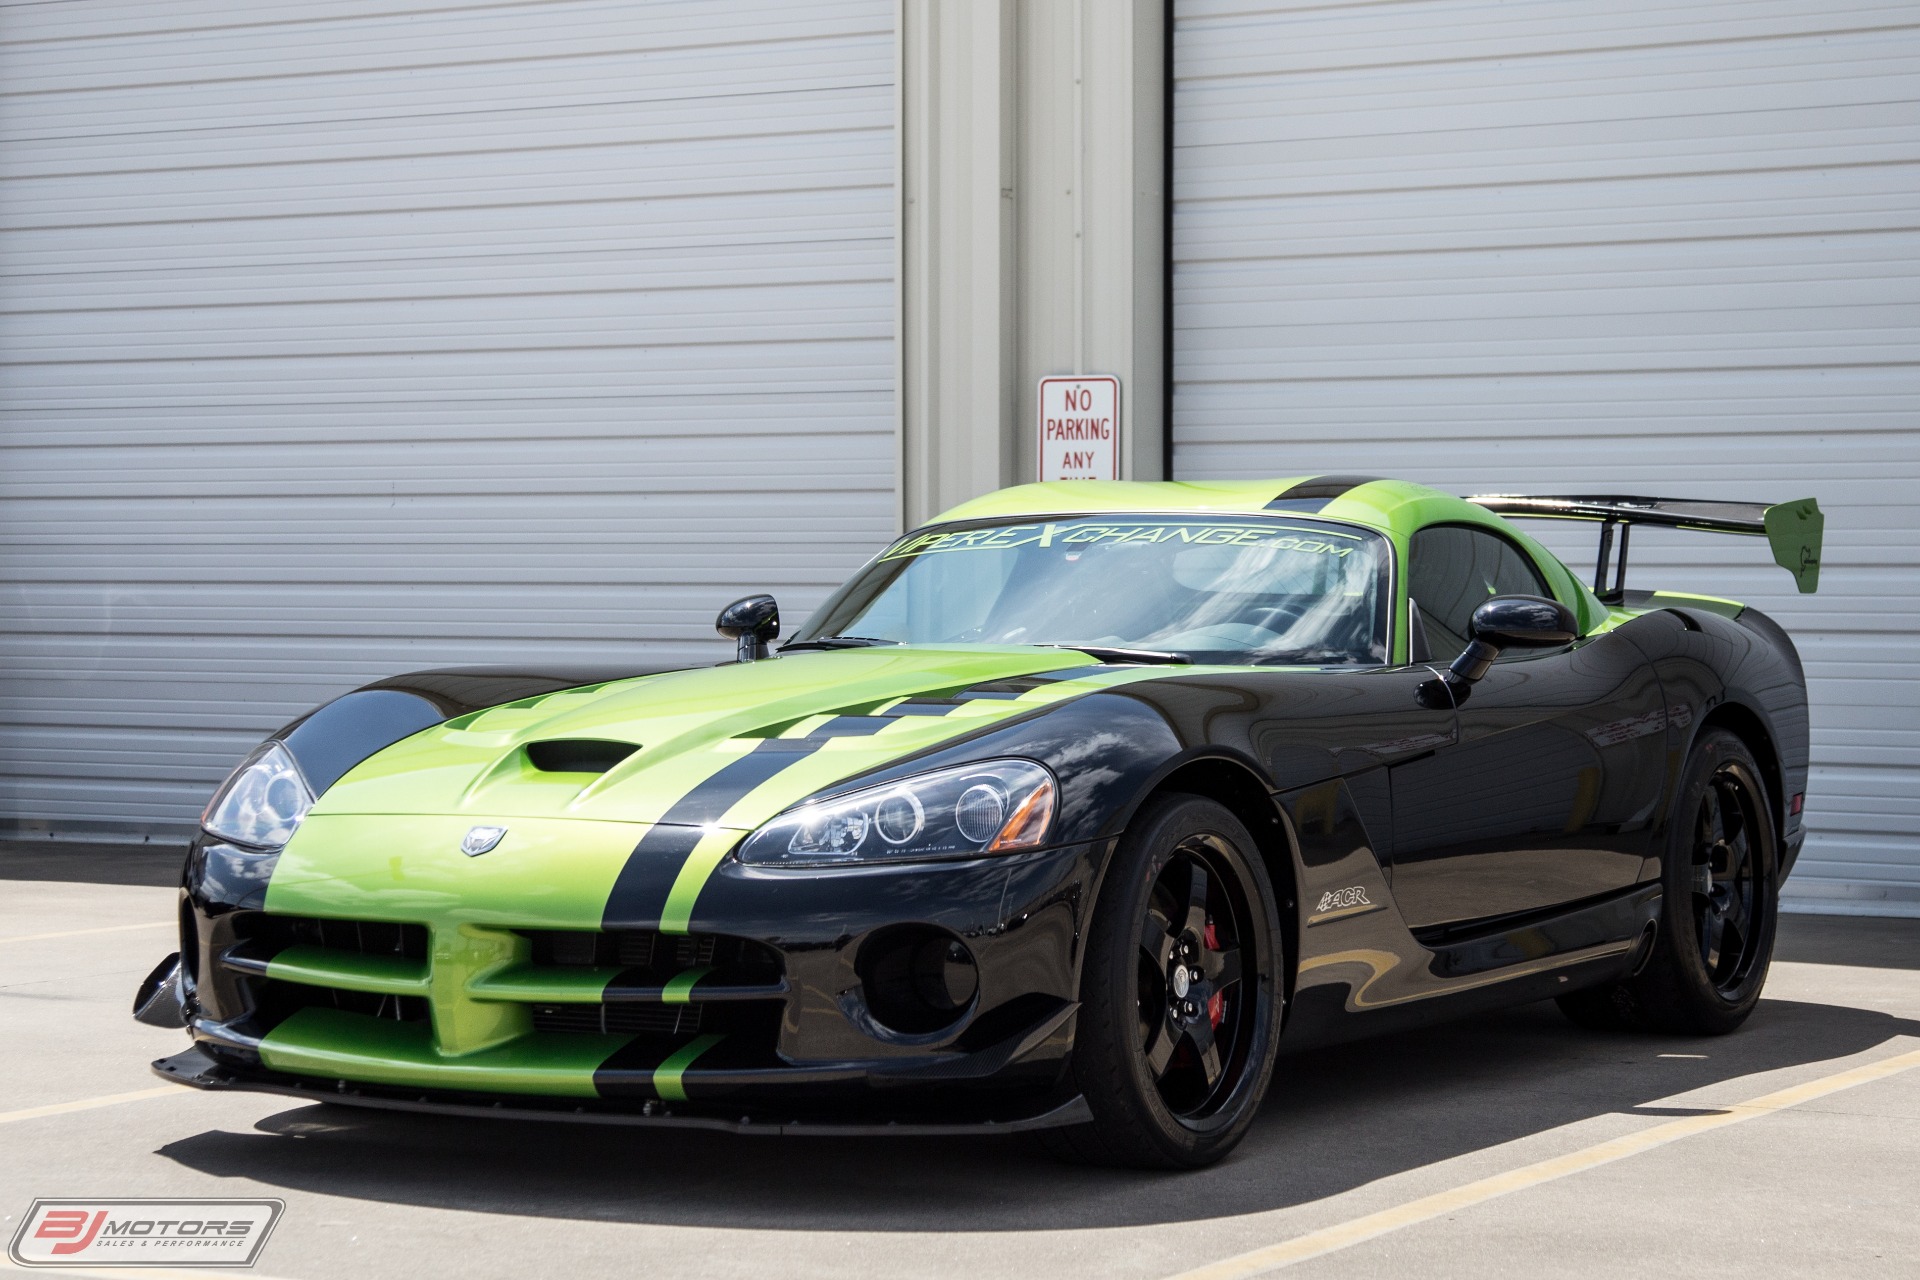 Used-2010-Dodge-Viper-ACR-Nurburgring-Edition